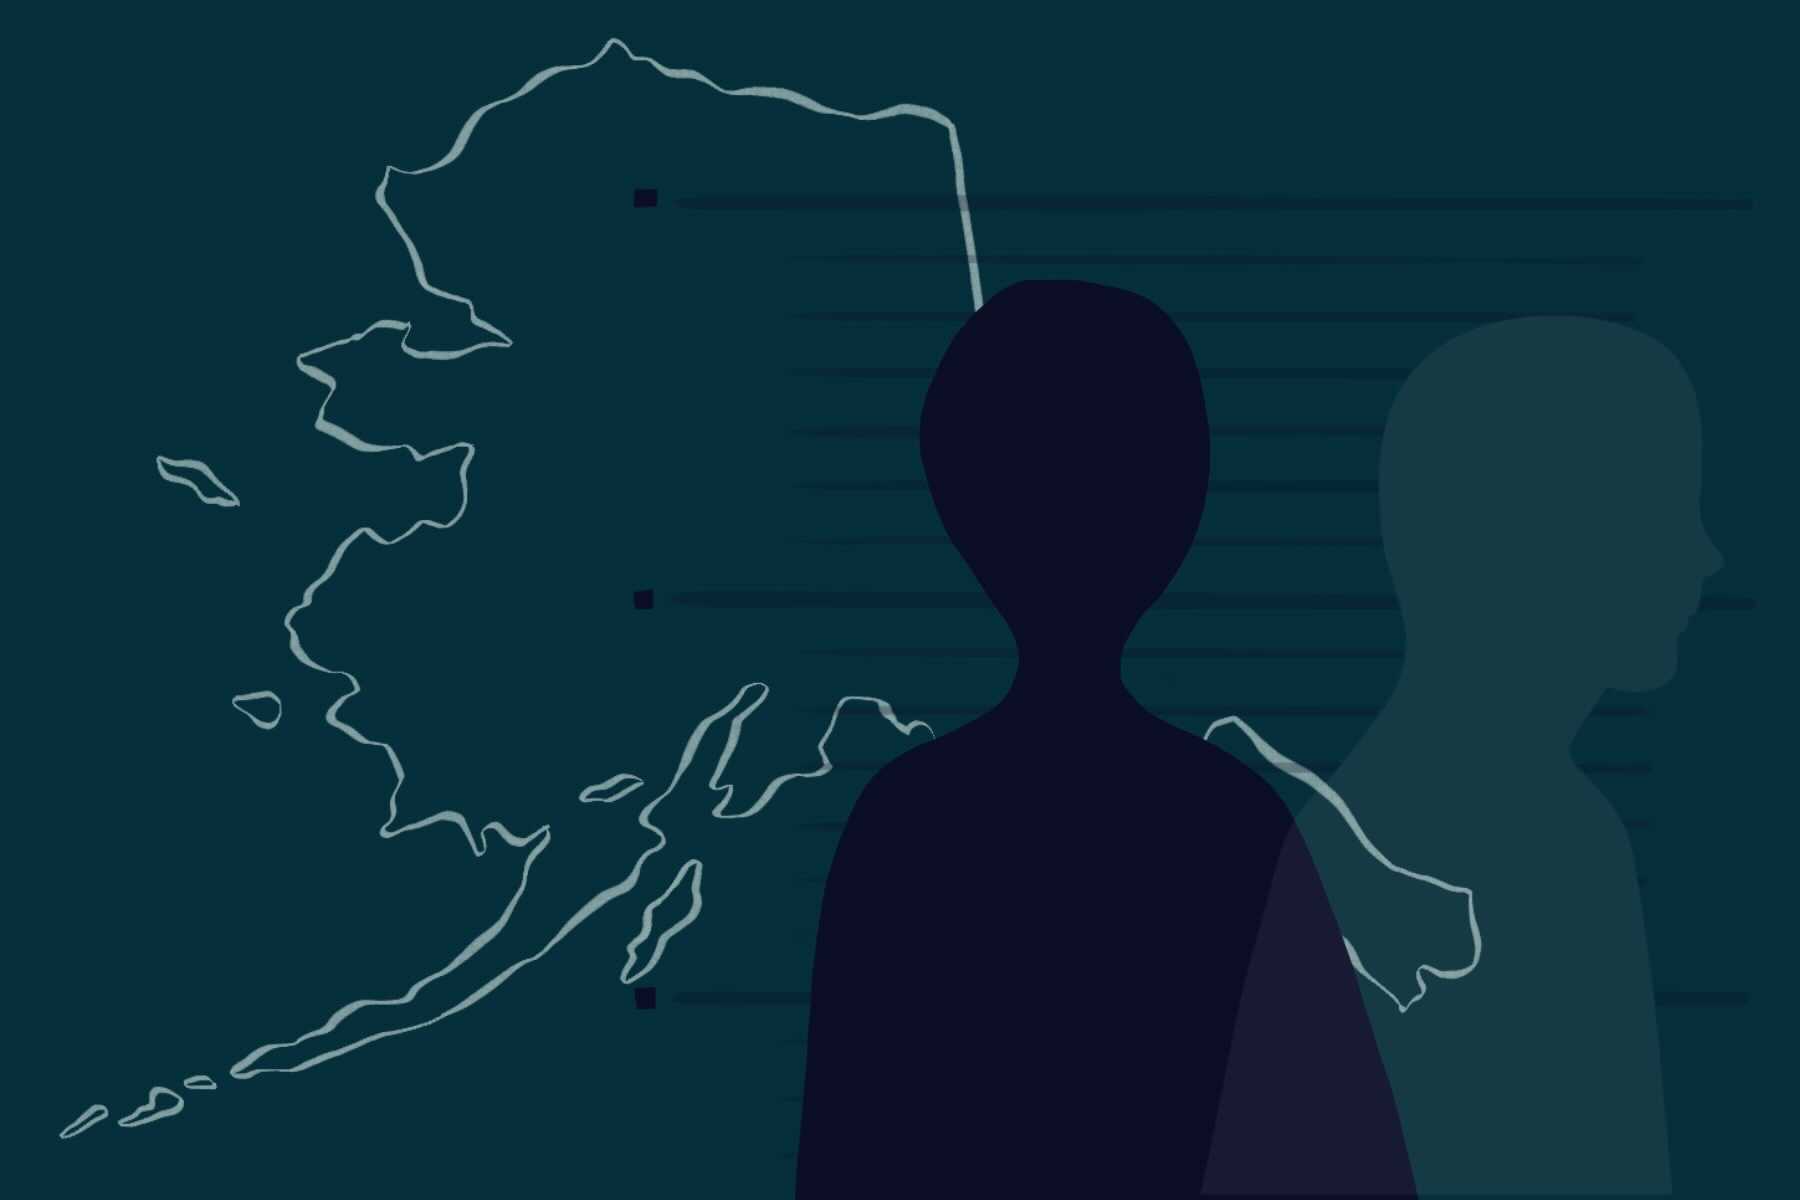 A mugshot over an outline of the state of Alaska